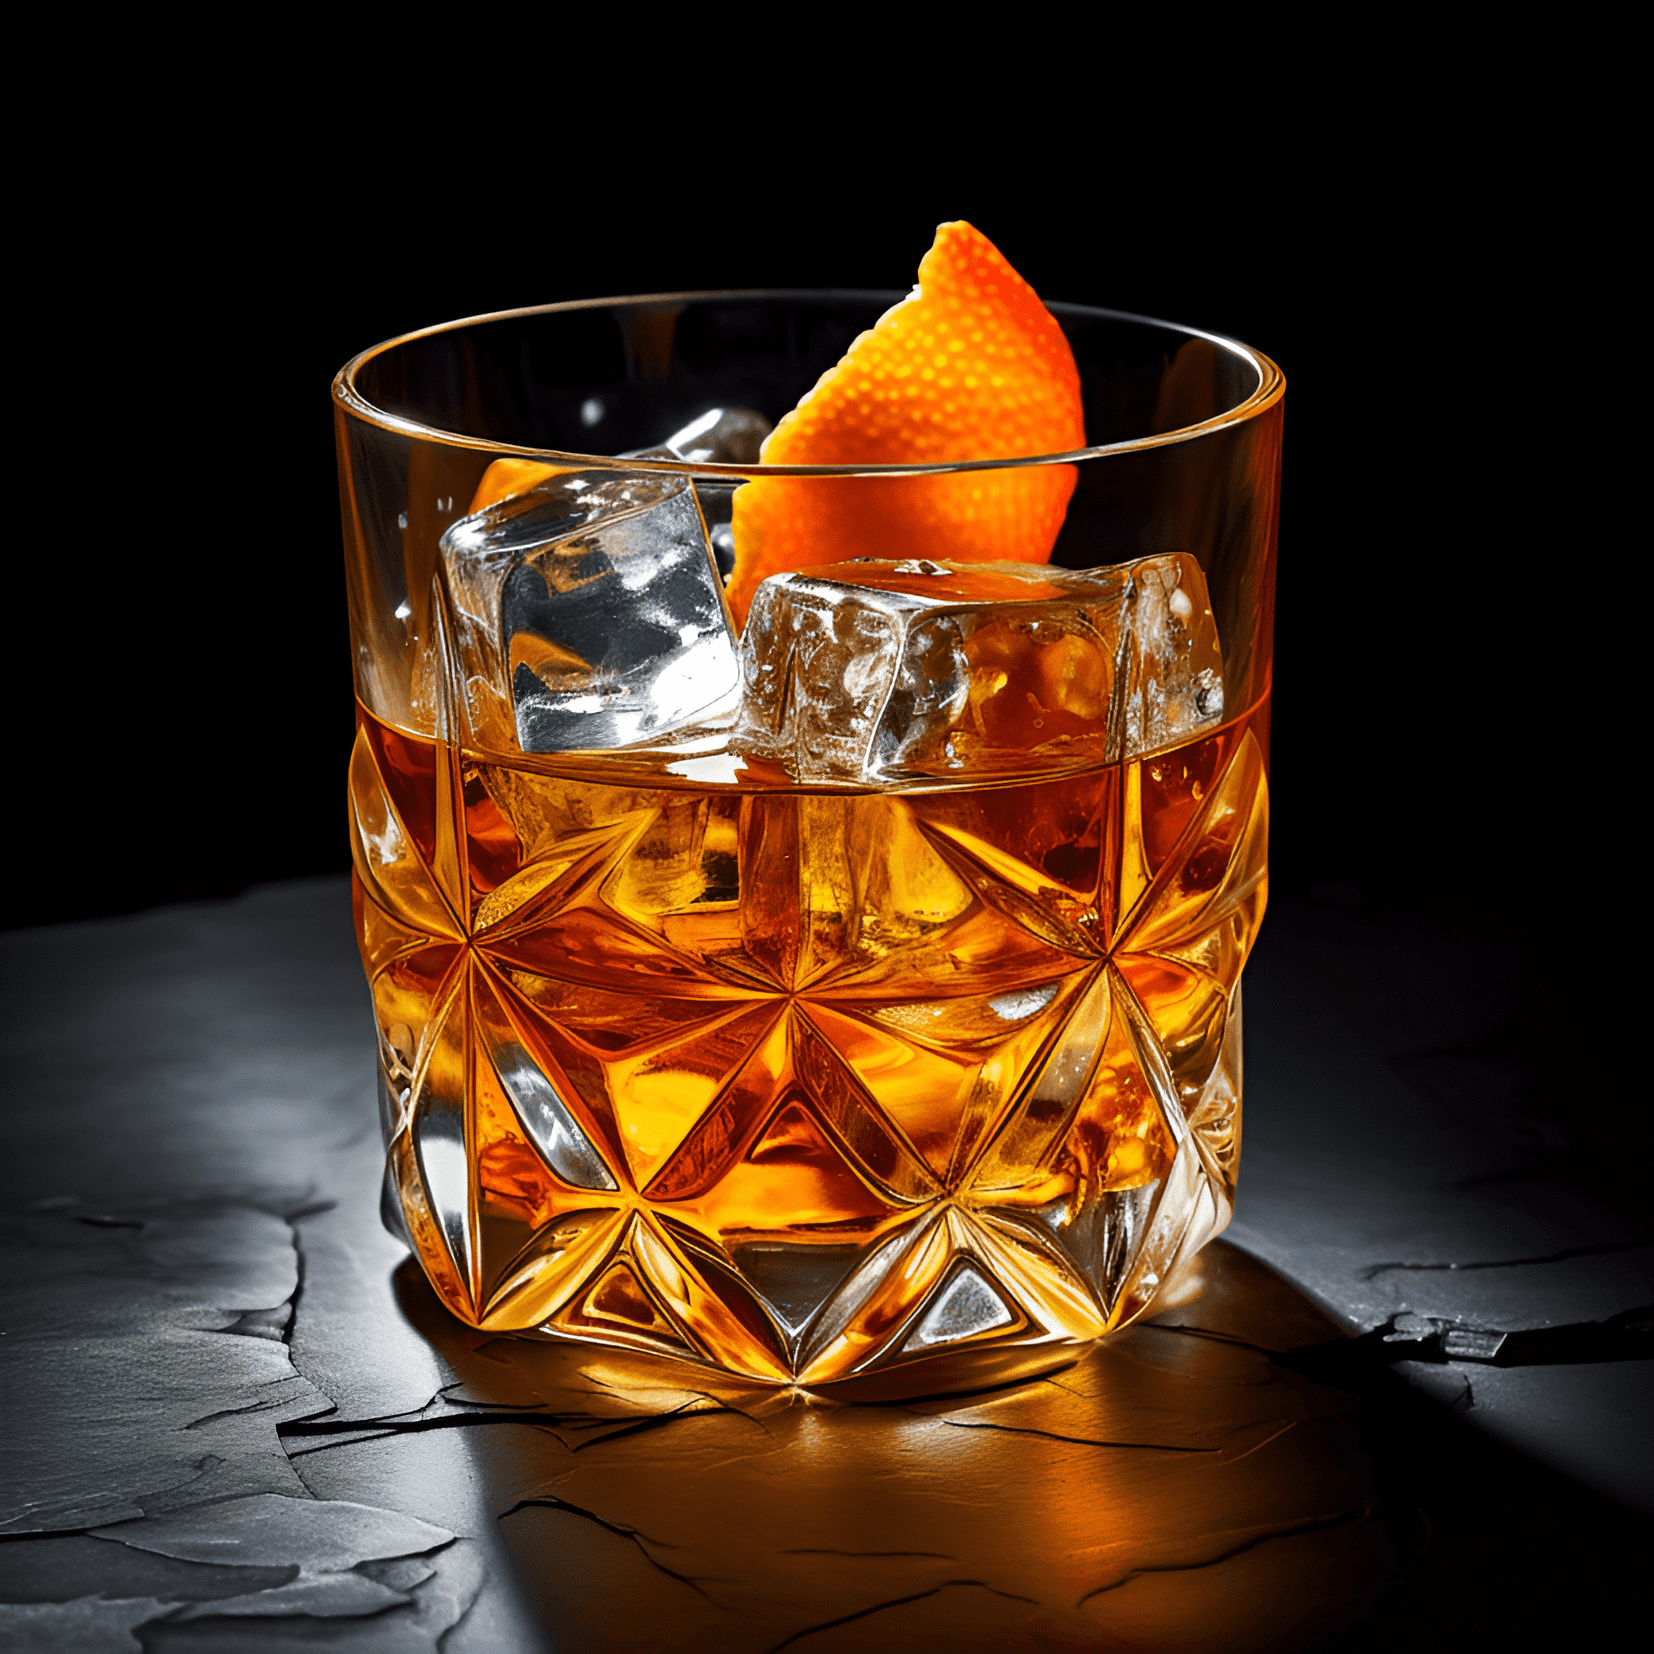 Swedish Punsch Cocktail Recipe - Swedish Punsch has a complex, sweet, and spicy taste with a hint of smokiness. The arrack provides a strong, distinctive base, while the sugar and spices add warmth and depth. The citrus notes from the lemon juice provide a refreshing contrast to the rich flavors.